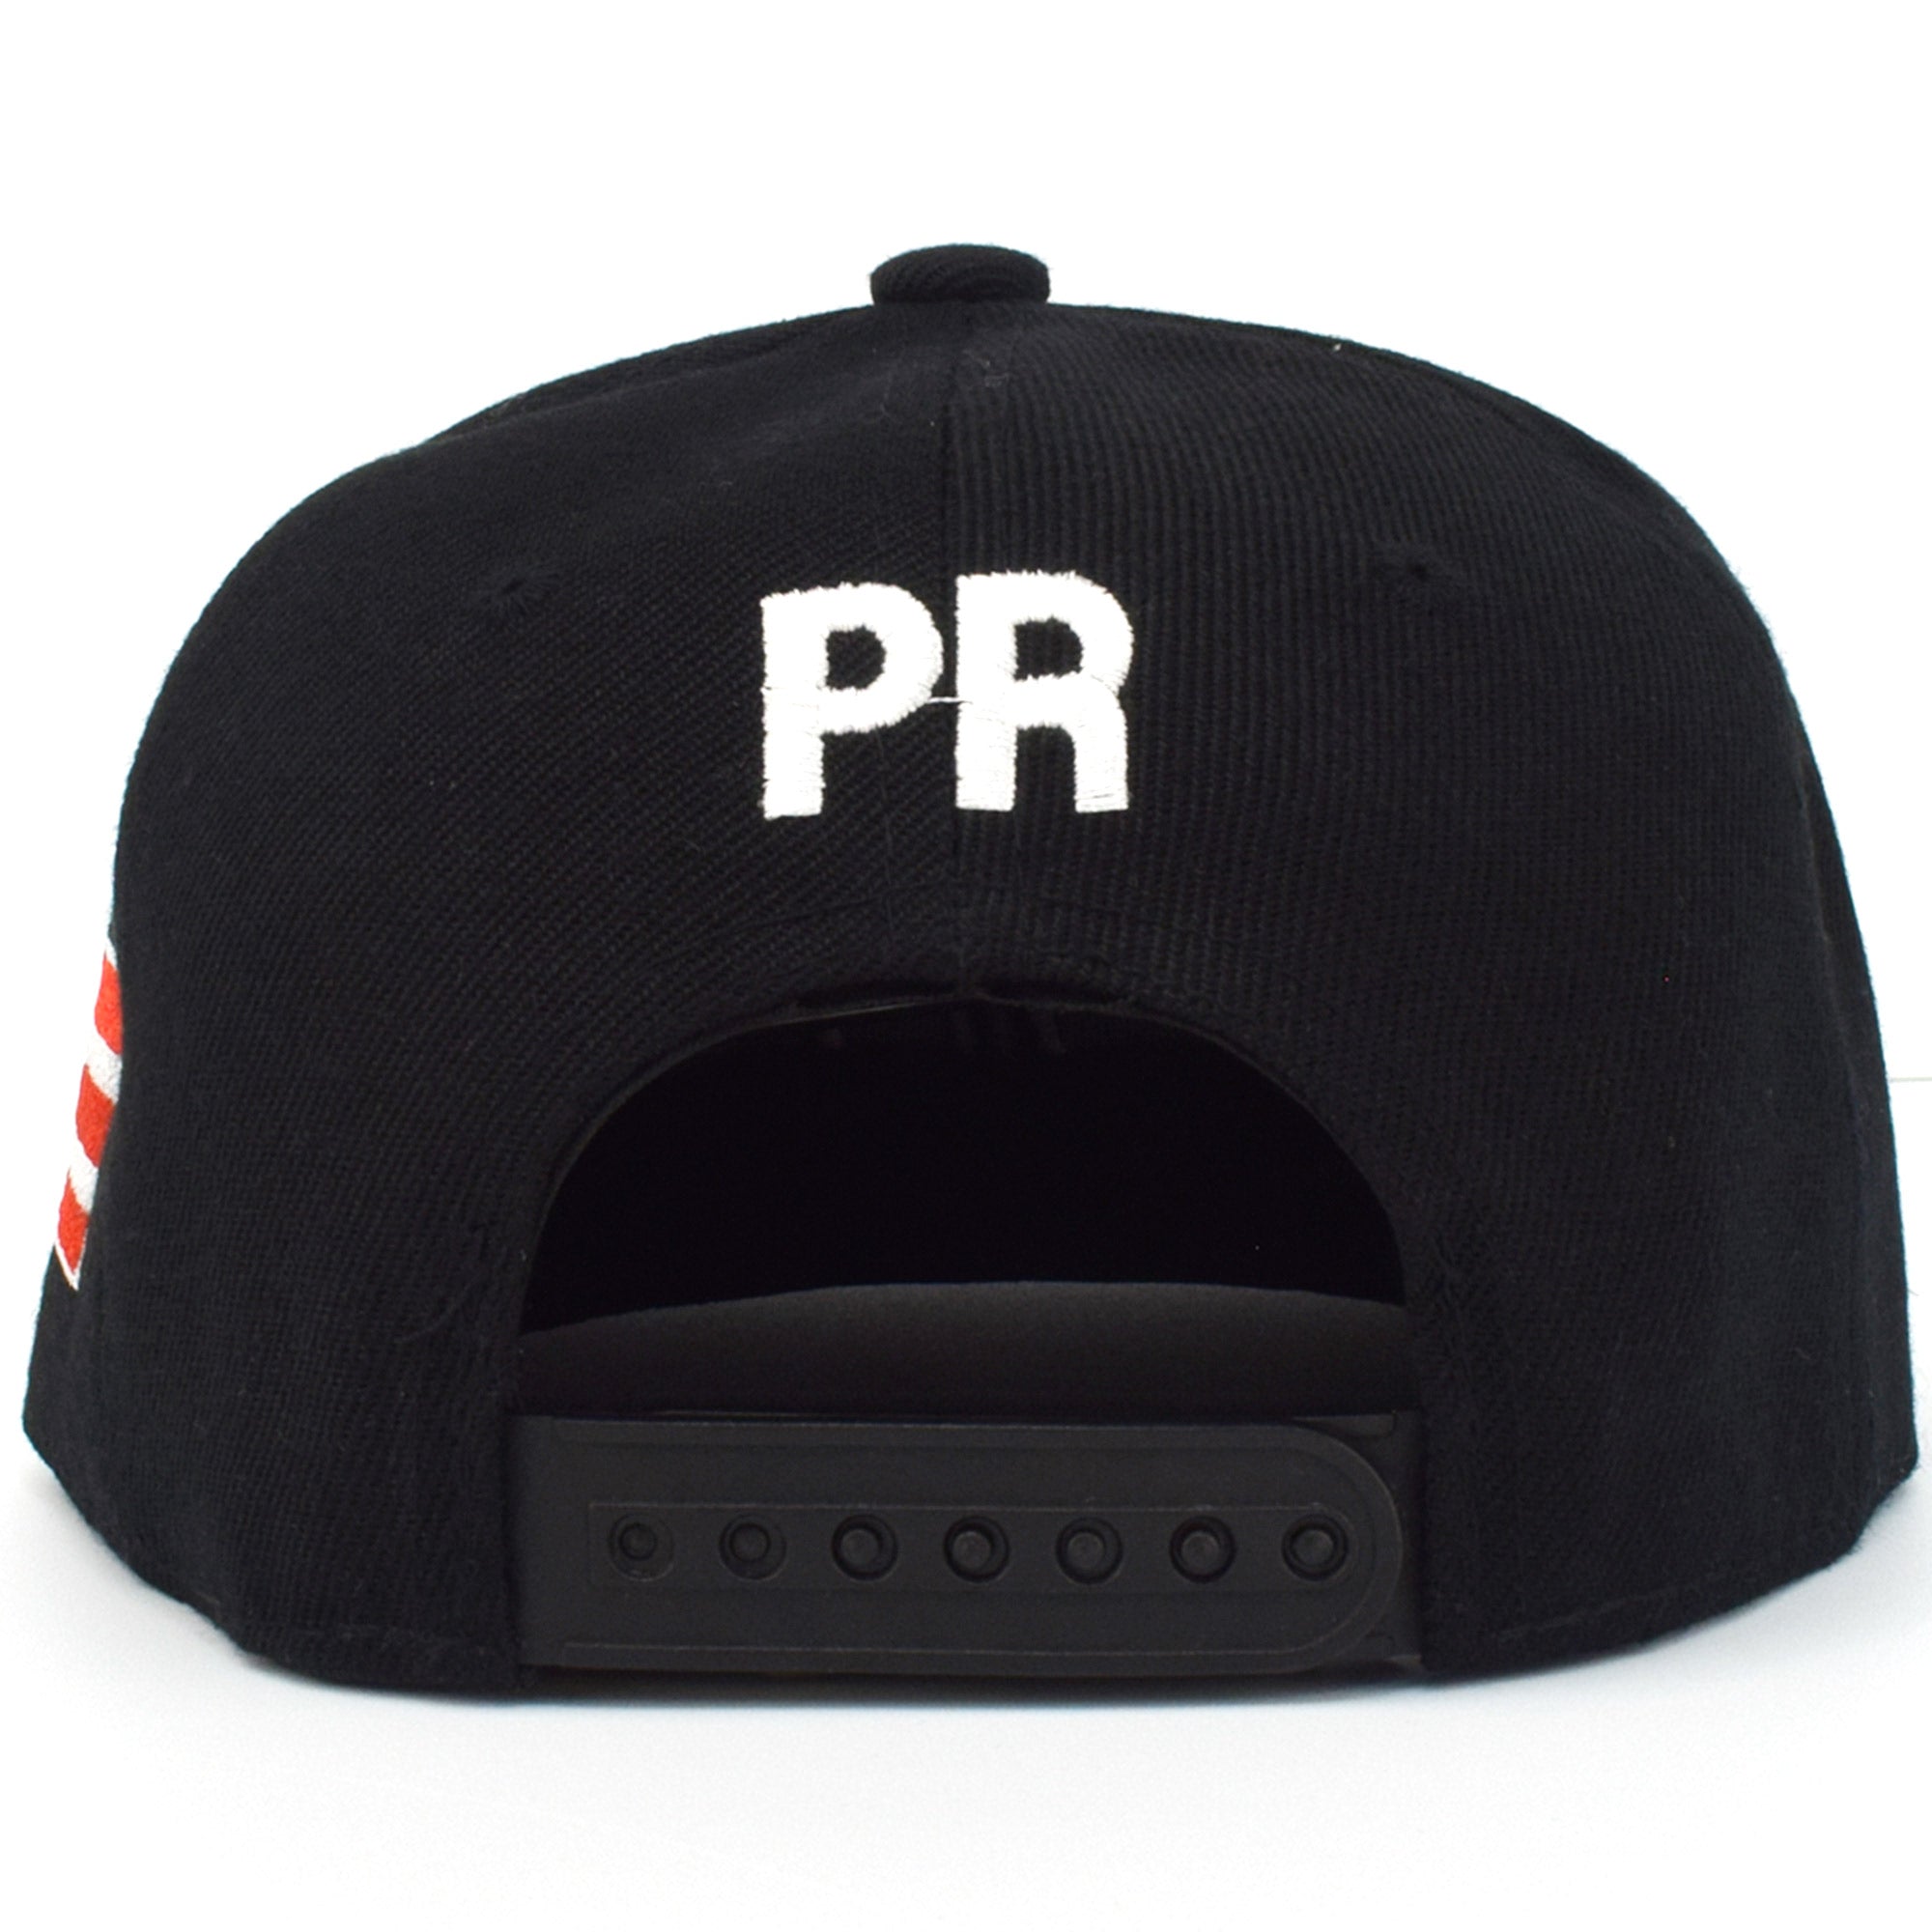 Puerto Rico Snap Back Caps with Embroidery PR Logo